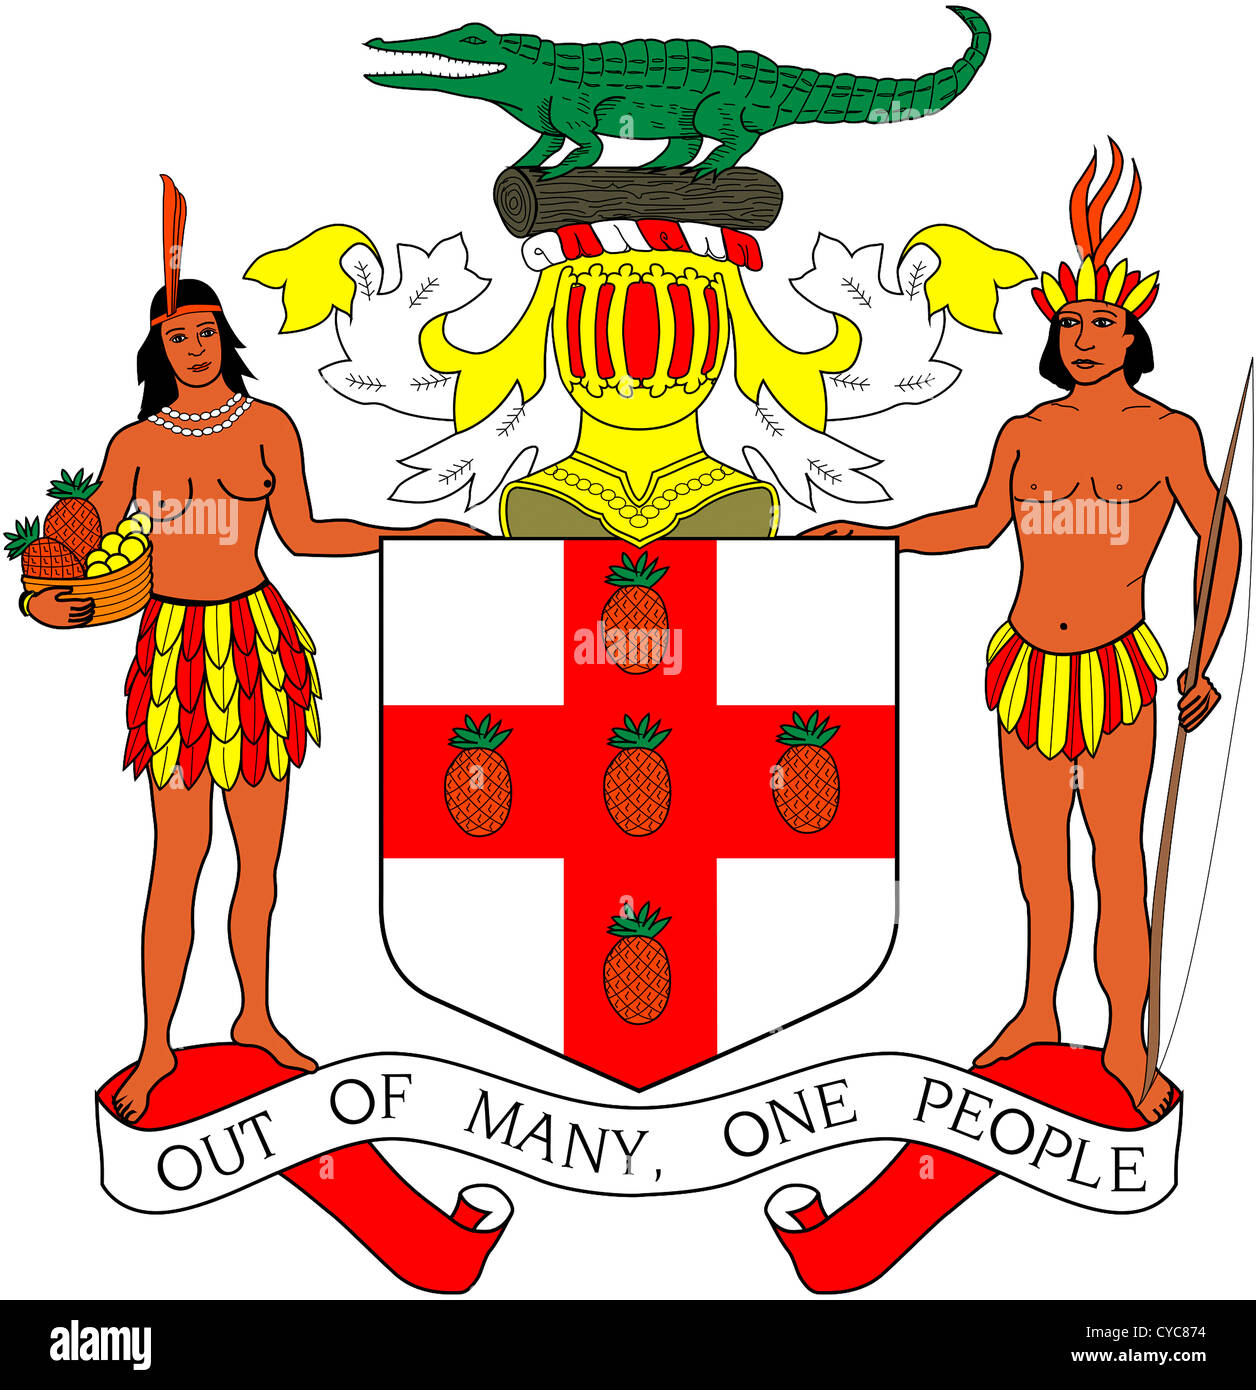 Coat of arms of Jamaica. Stock Photo